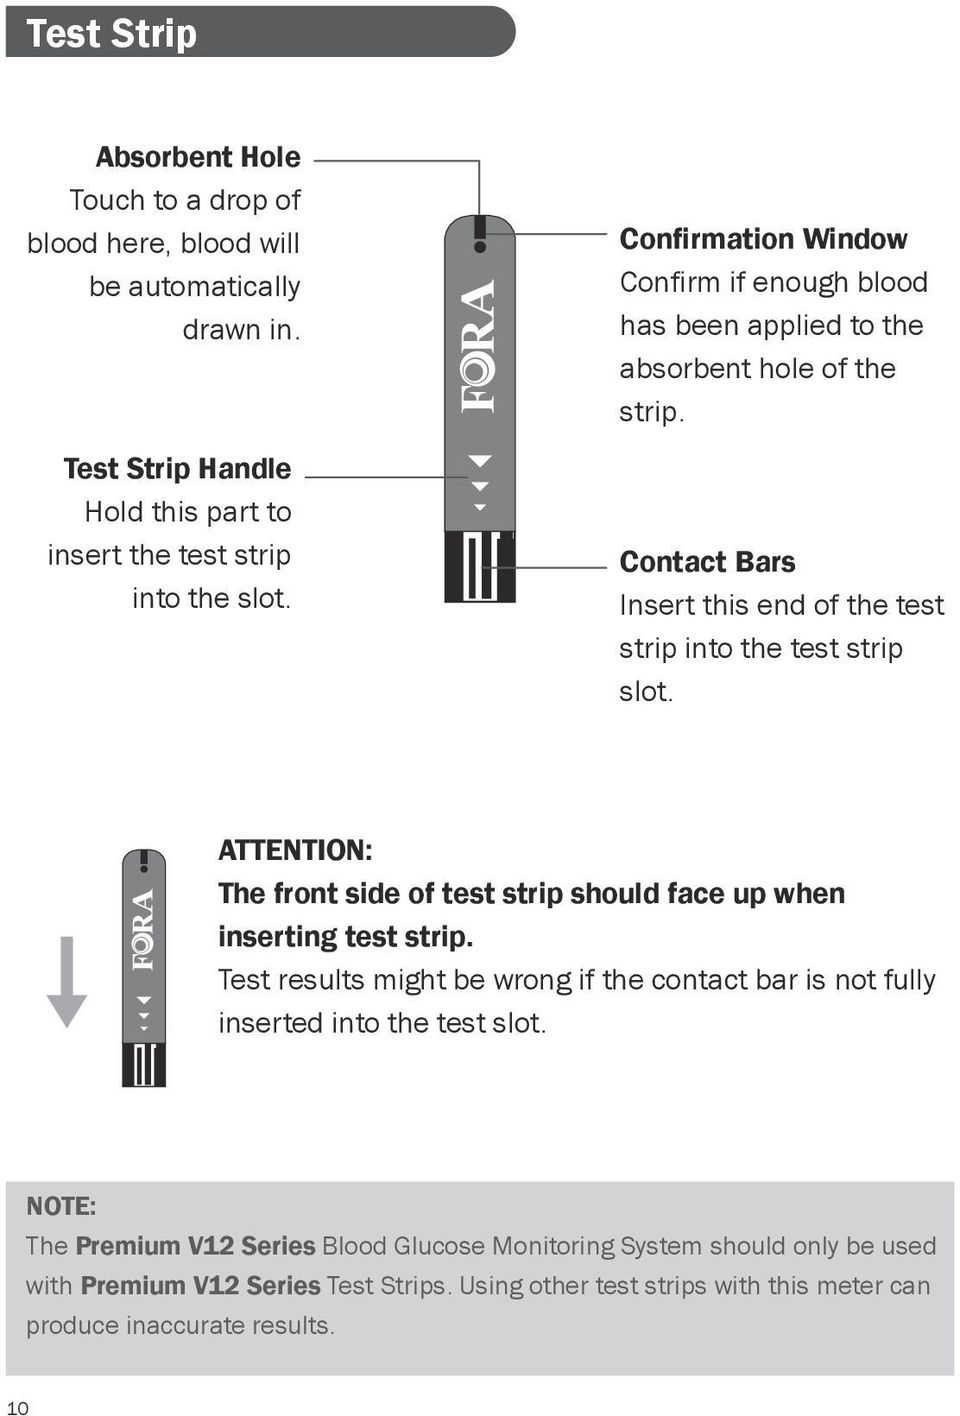 ATTENTION: The front side of test strip should face up when inserting test strip. Test results might be wrong if the contact bar is not fully inserted into the test slot.